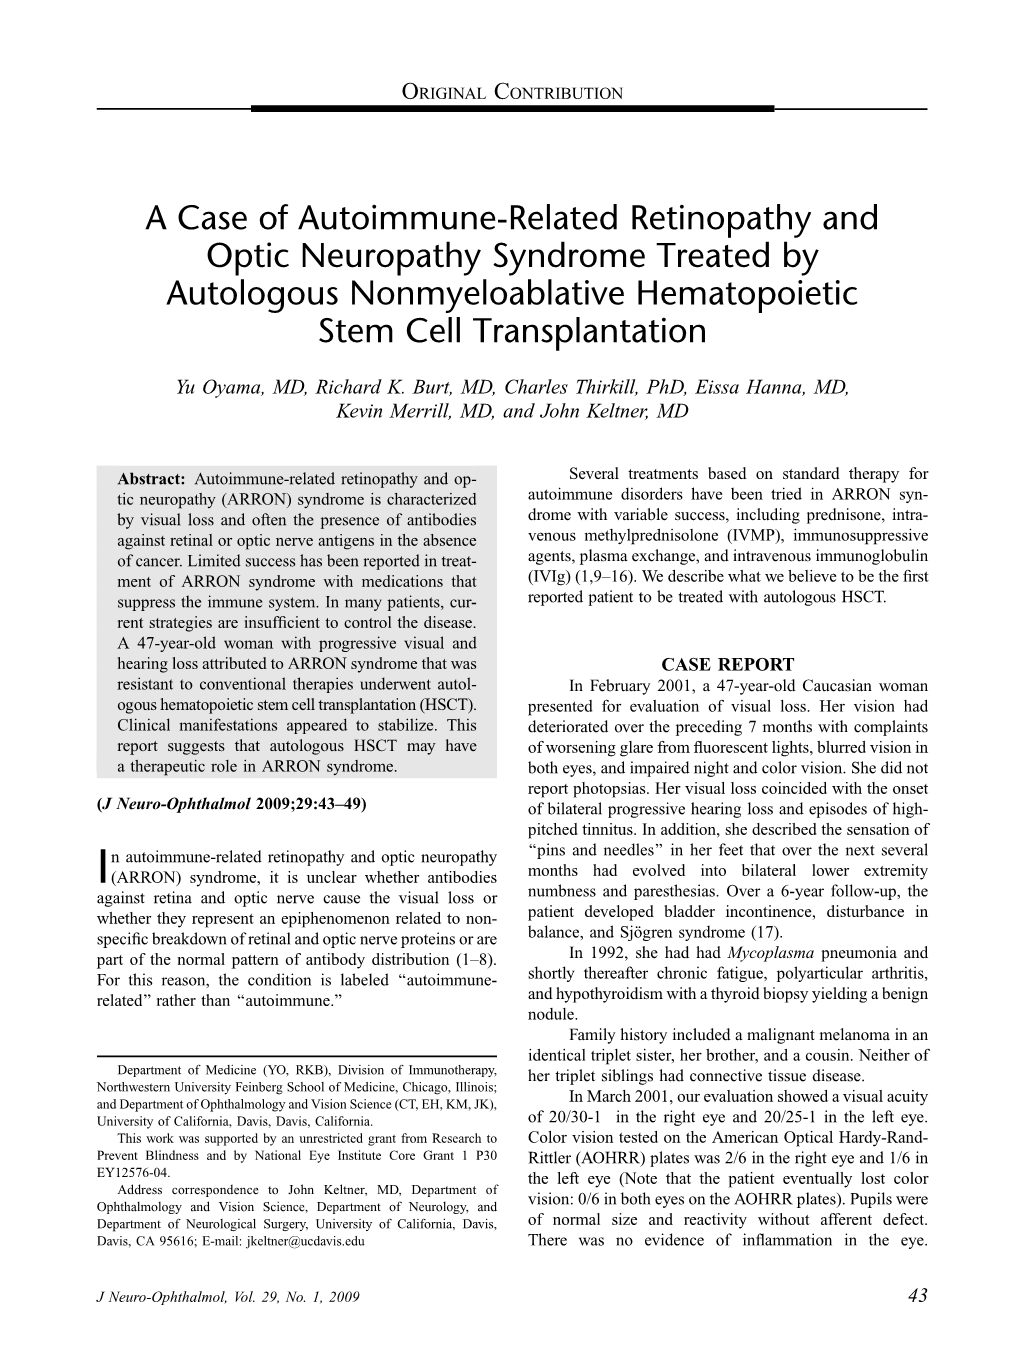 A Case of Autoimmune-Related Retinopathy and Optic Neuropathy Syndrome Treated by Autologous Nonmyeloablative Hematopoietic Stem Cell Transplantation